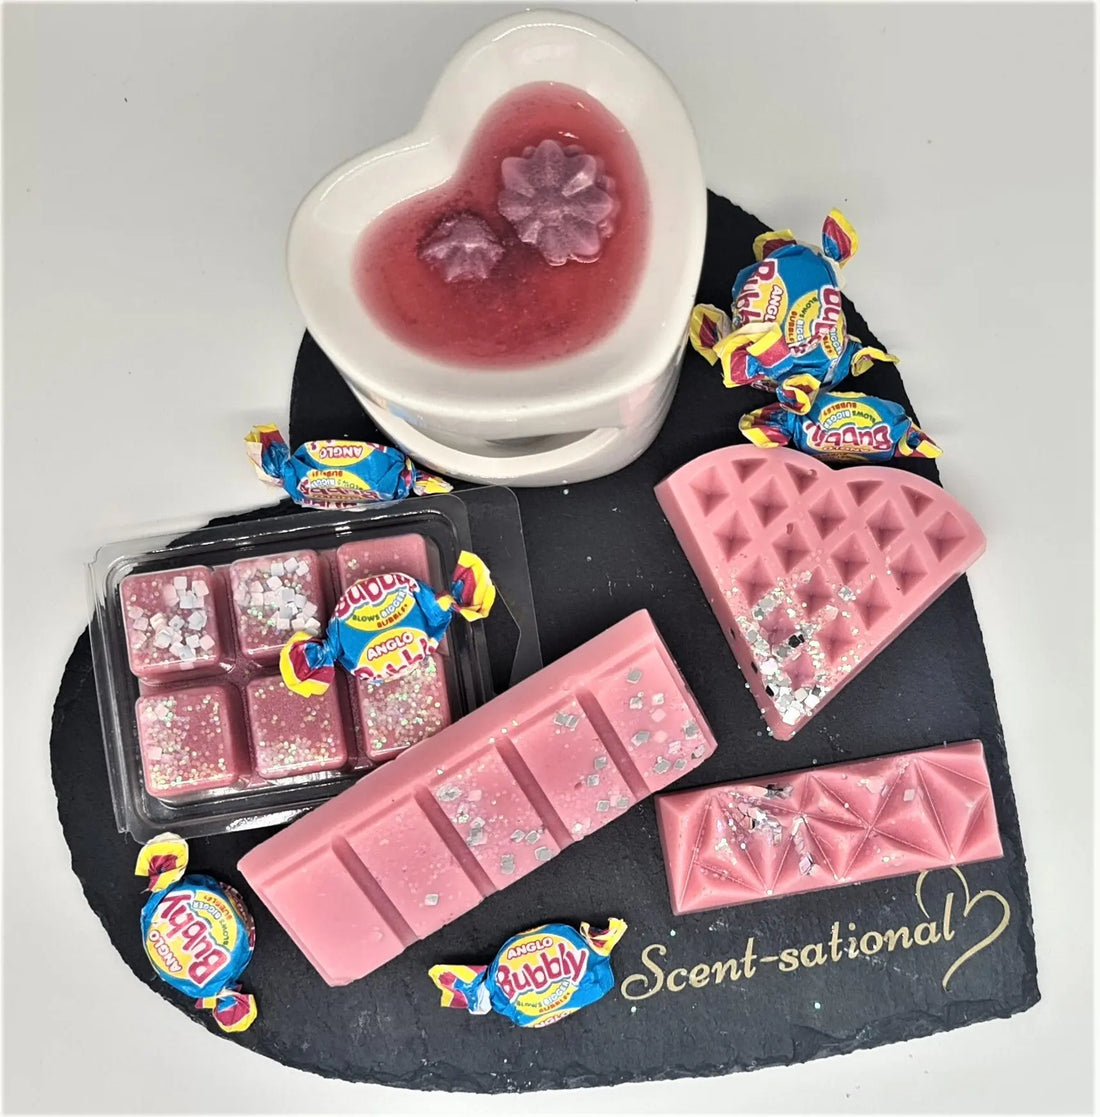 Scent Sational Waxmelts : Discover the Magic of Wax Melts Today! Scent Sational Wax melts